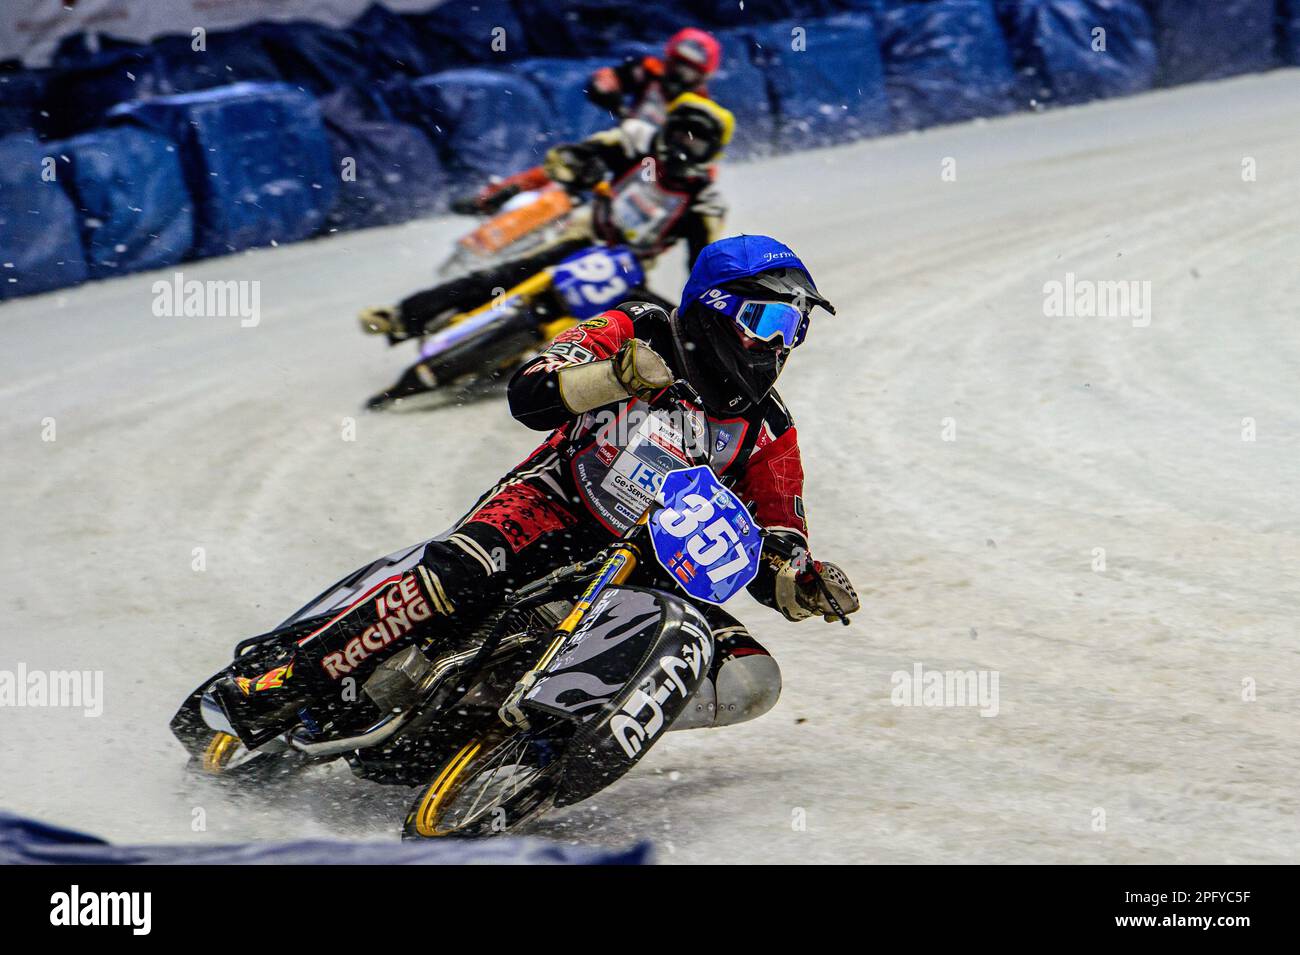 Inzell, Germany on Sunday 19th March 2023. Jo Saetre (357) (Blue) leads Franz Mayerbüchler (93) (Yellow) and Sebastian Reitsma (283) (Red) during the Ice Speedway Gladiators World Championship Final 2 at Max-Aicher-Arena, Inzell, Germany on Sunday 19th March 2023. (Photo: Ian Charles | MI News) Credit: MI News & Sport /Alamy Live News Stock Photo